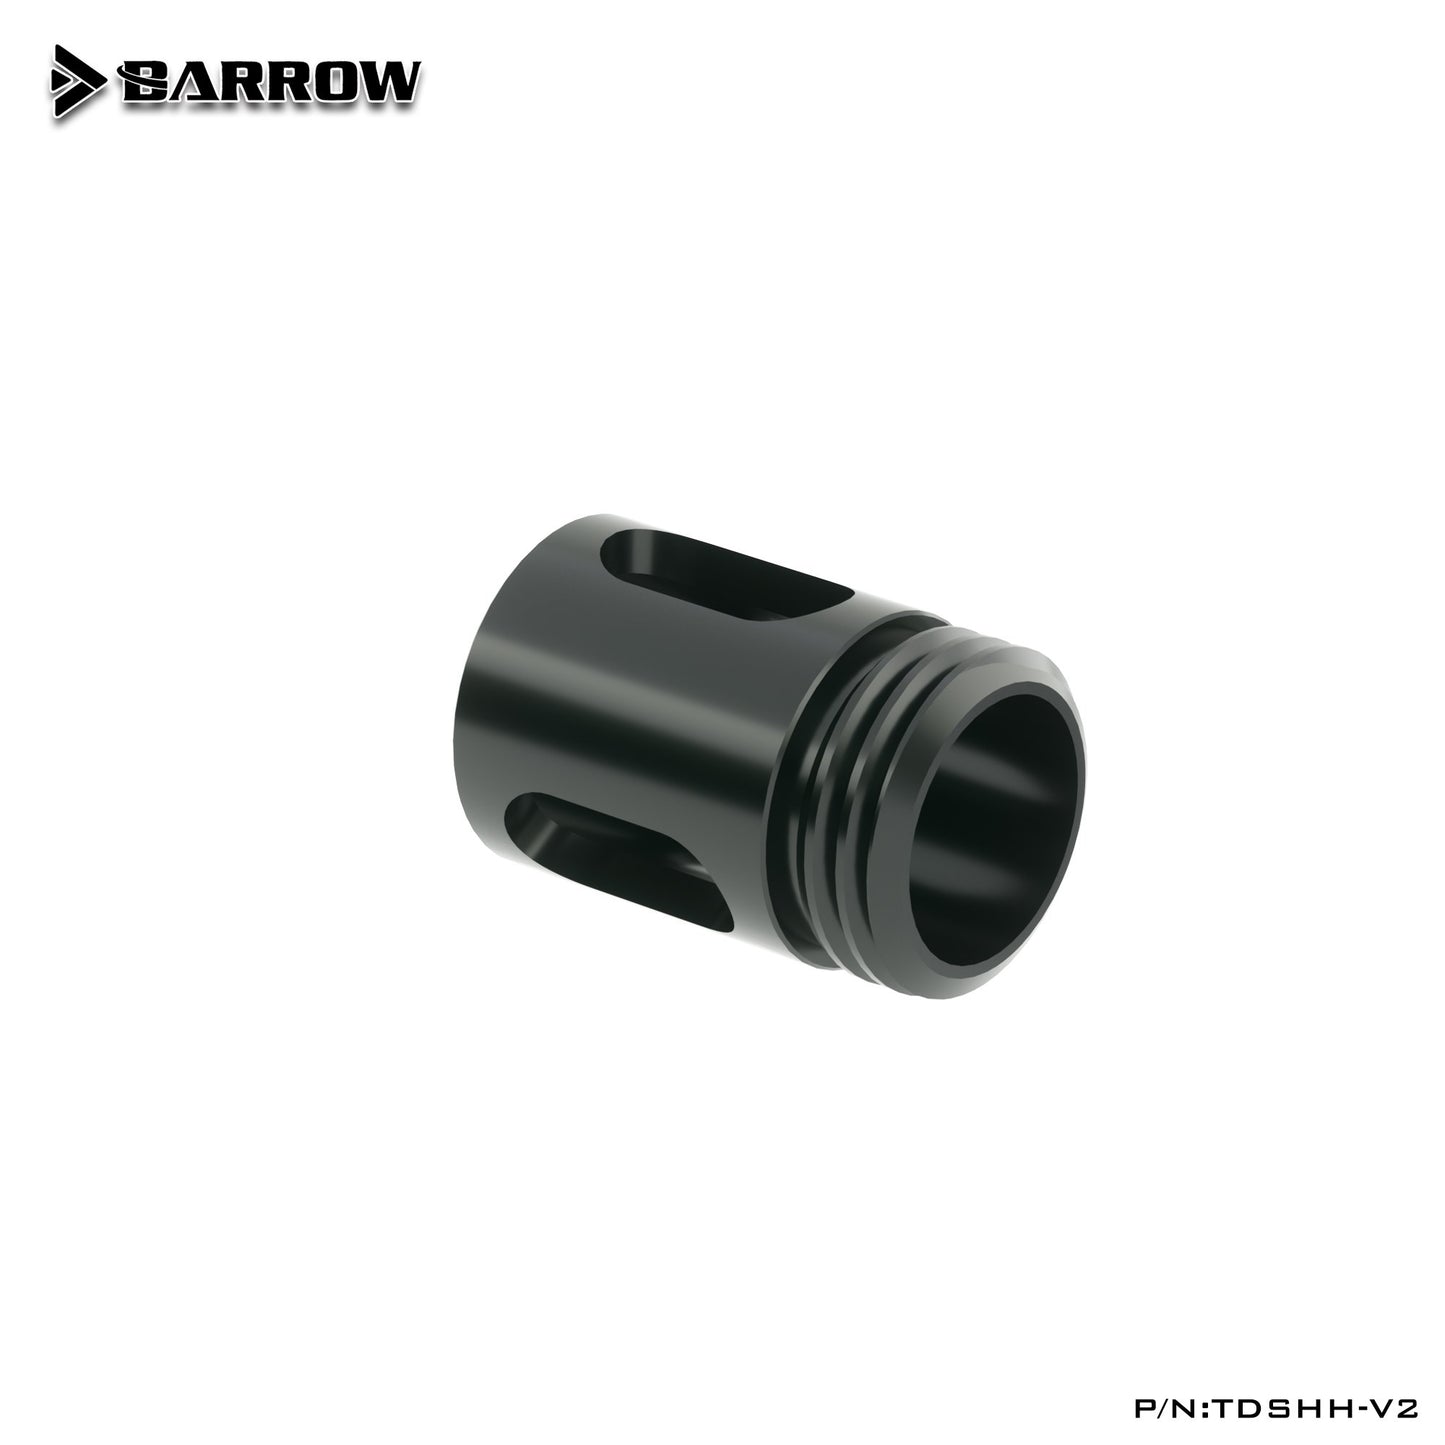 Barrow G1 / 4 " White Black Silver multi-stage, flow commutated buffer water cooling fittings TDSHH-V2